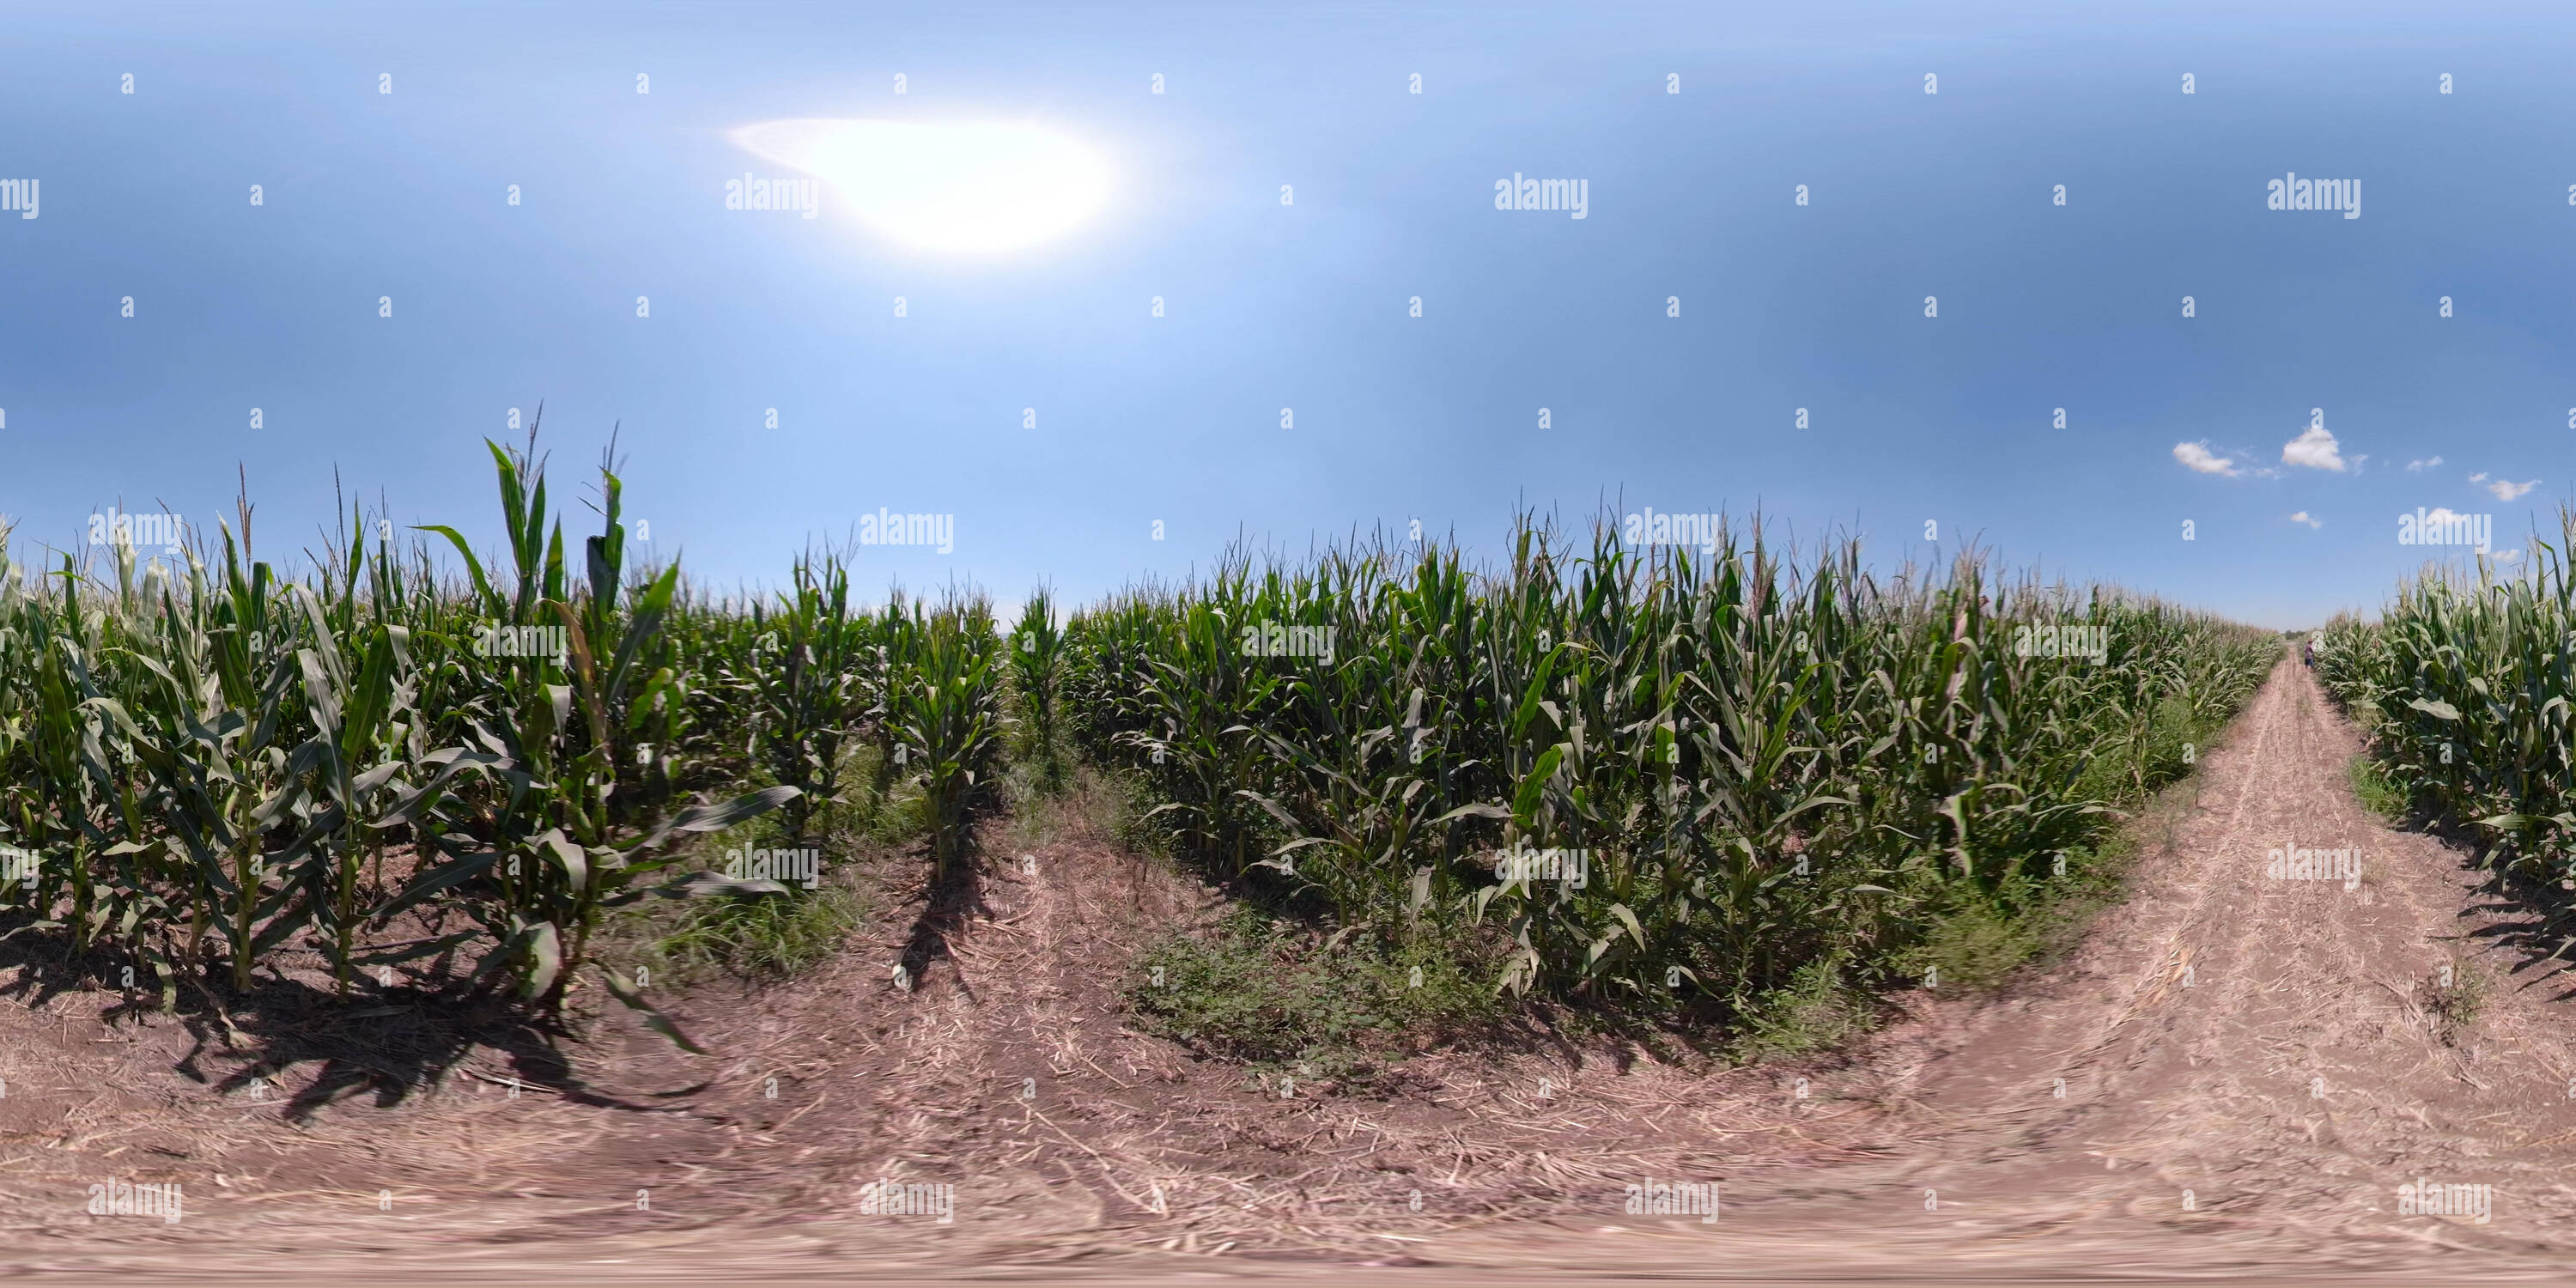 360° view of Rows corn plants with cobs cornfield. 360 vr panorama 2:1 aspect ratio for VR apps - Alamy